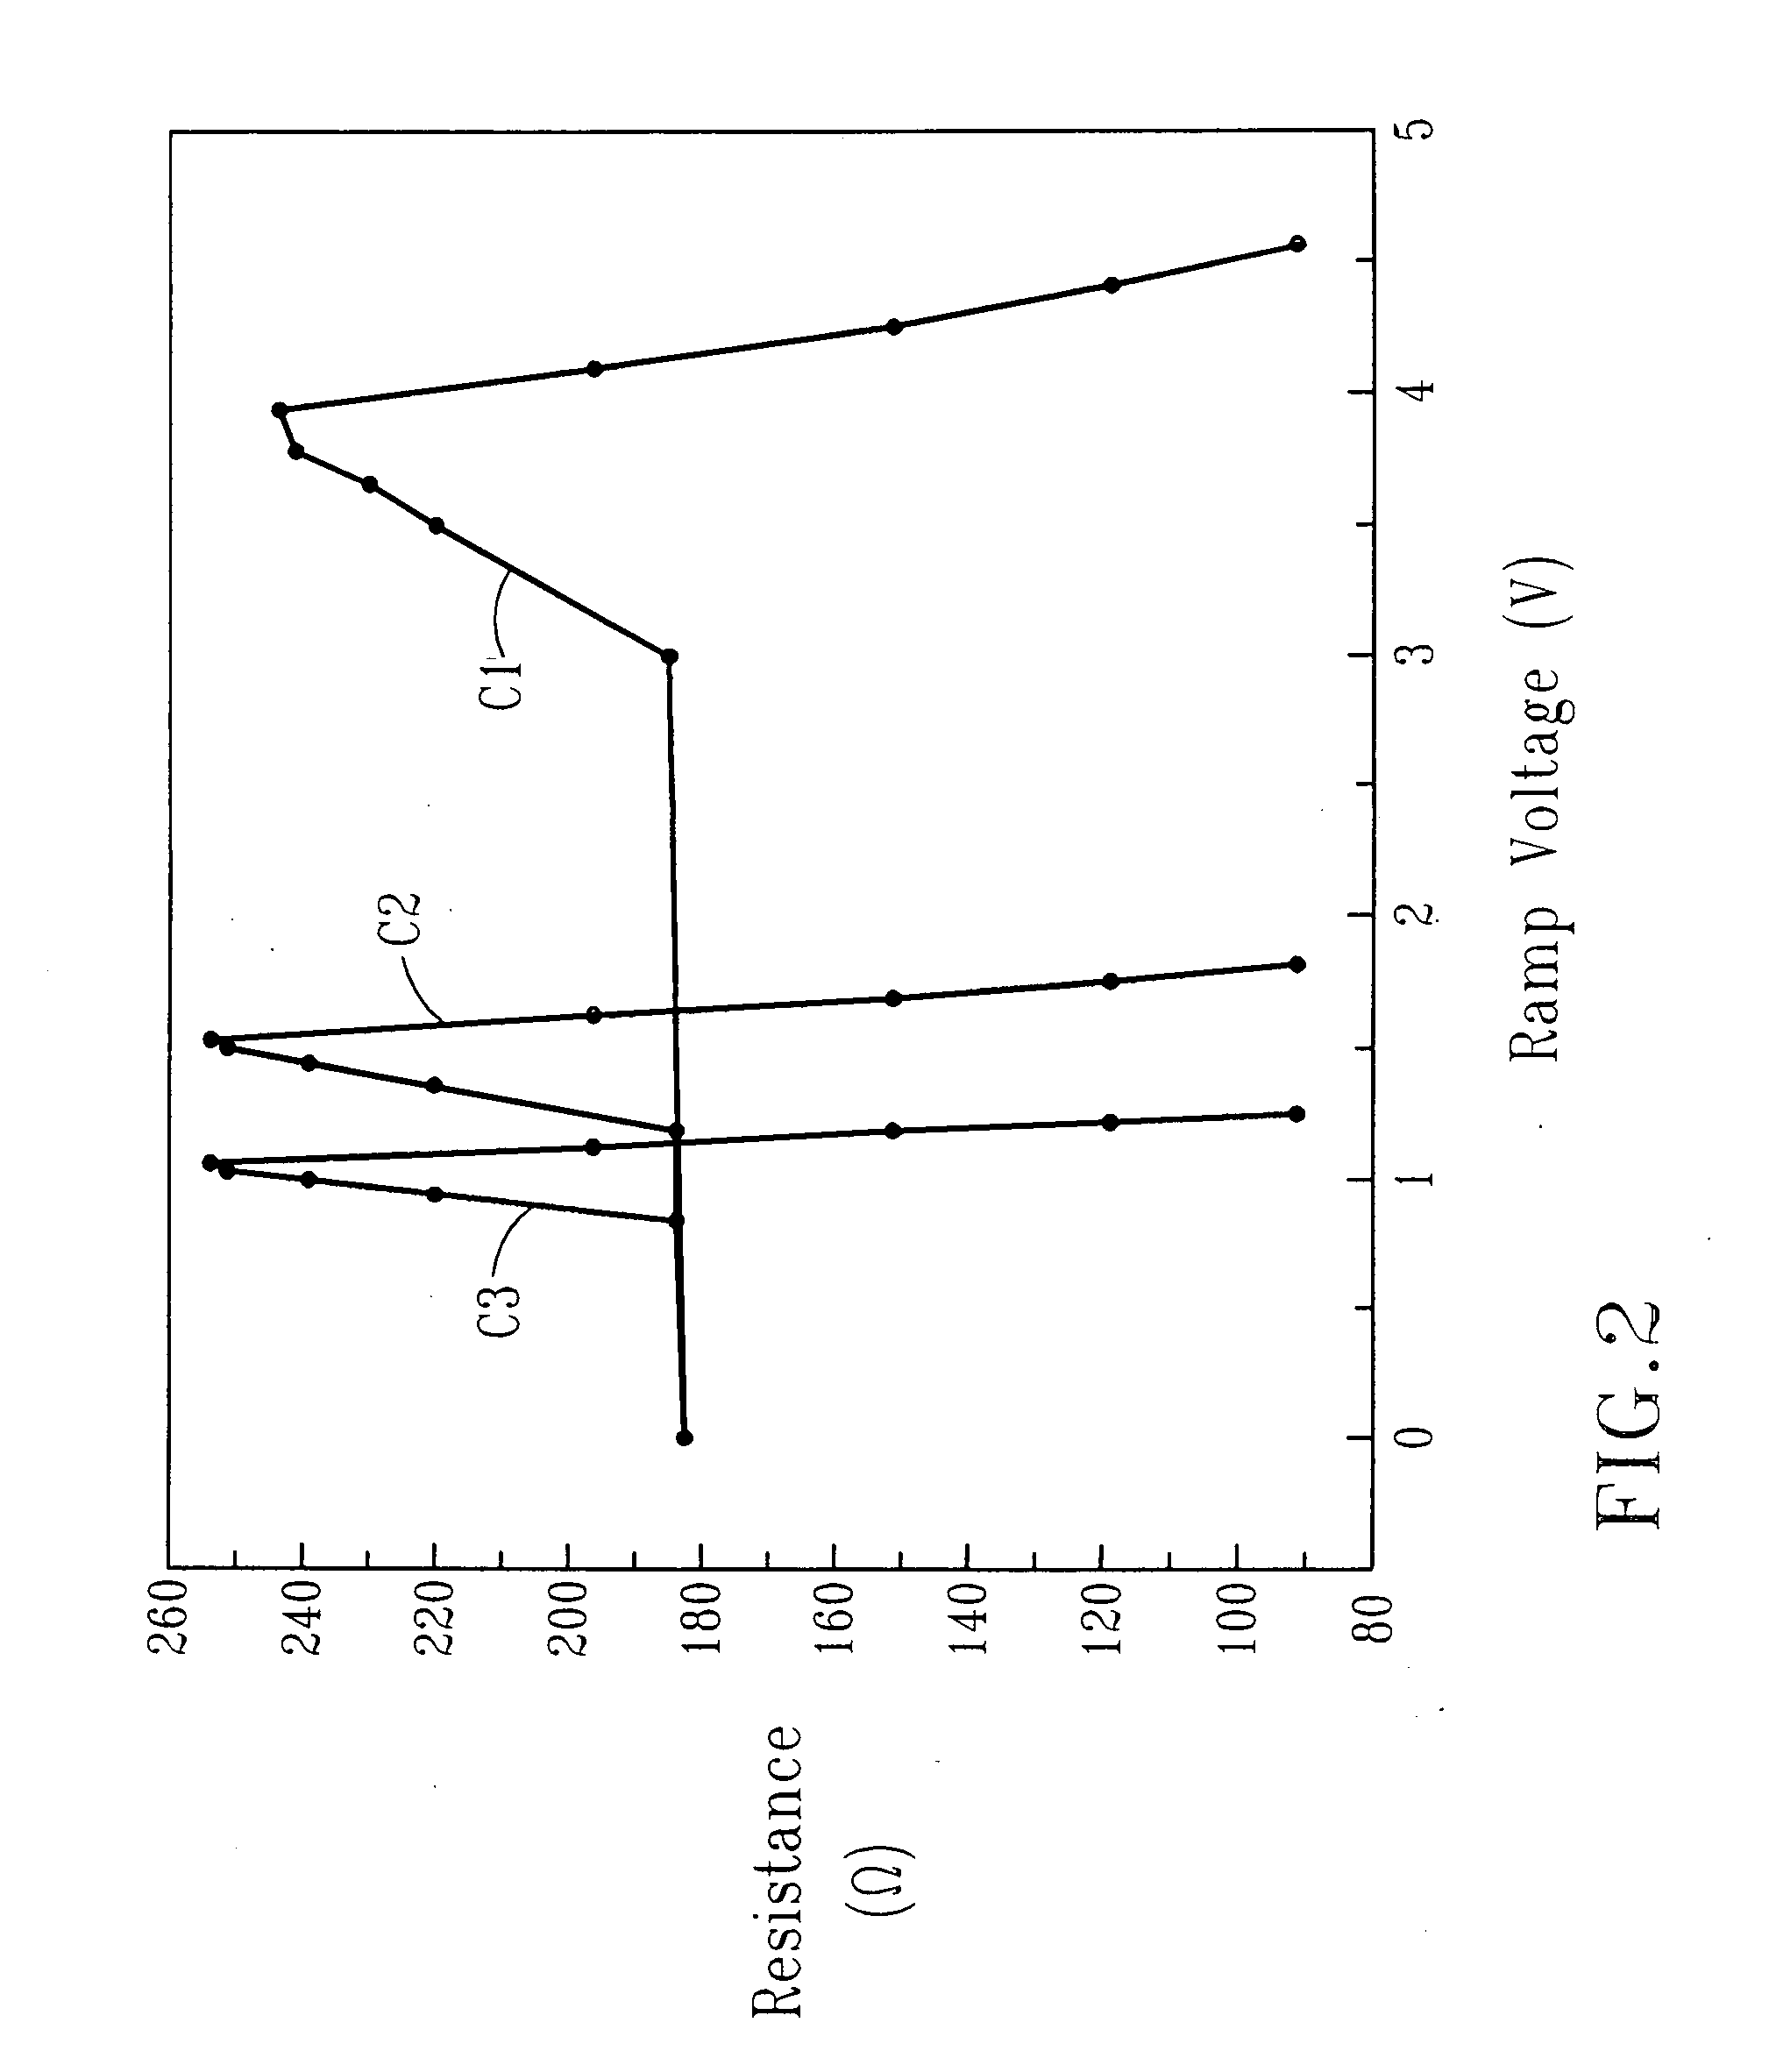 PHASE-CHANGE TaN RESISTOR BASED TRIPLE-STATE/MULTI-STATE READ ONLY MEMORY